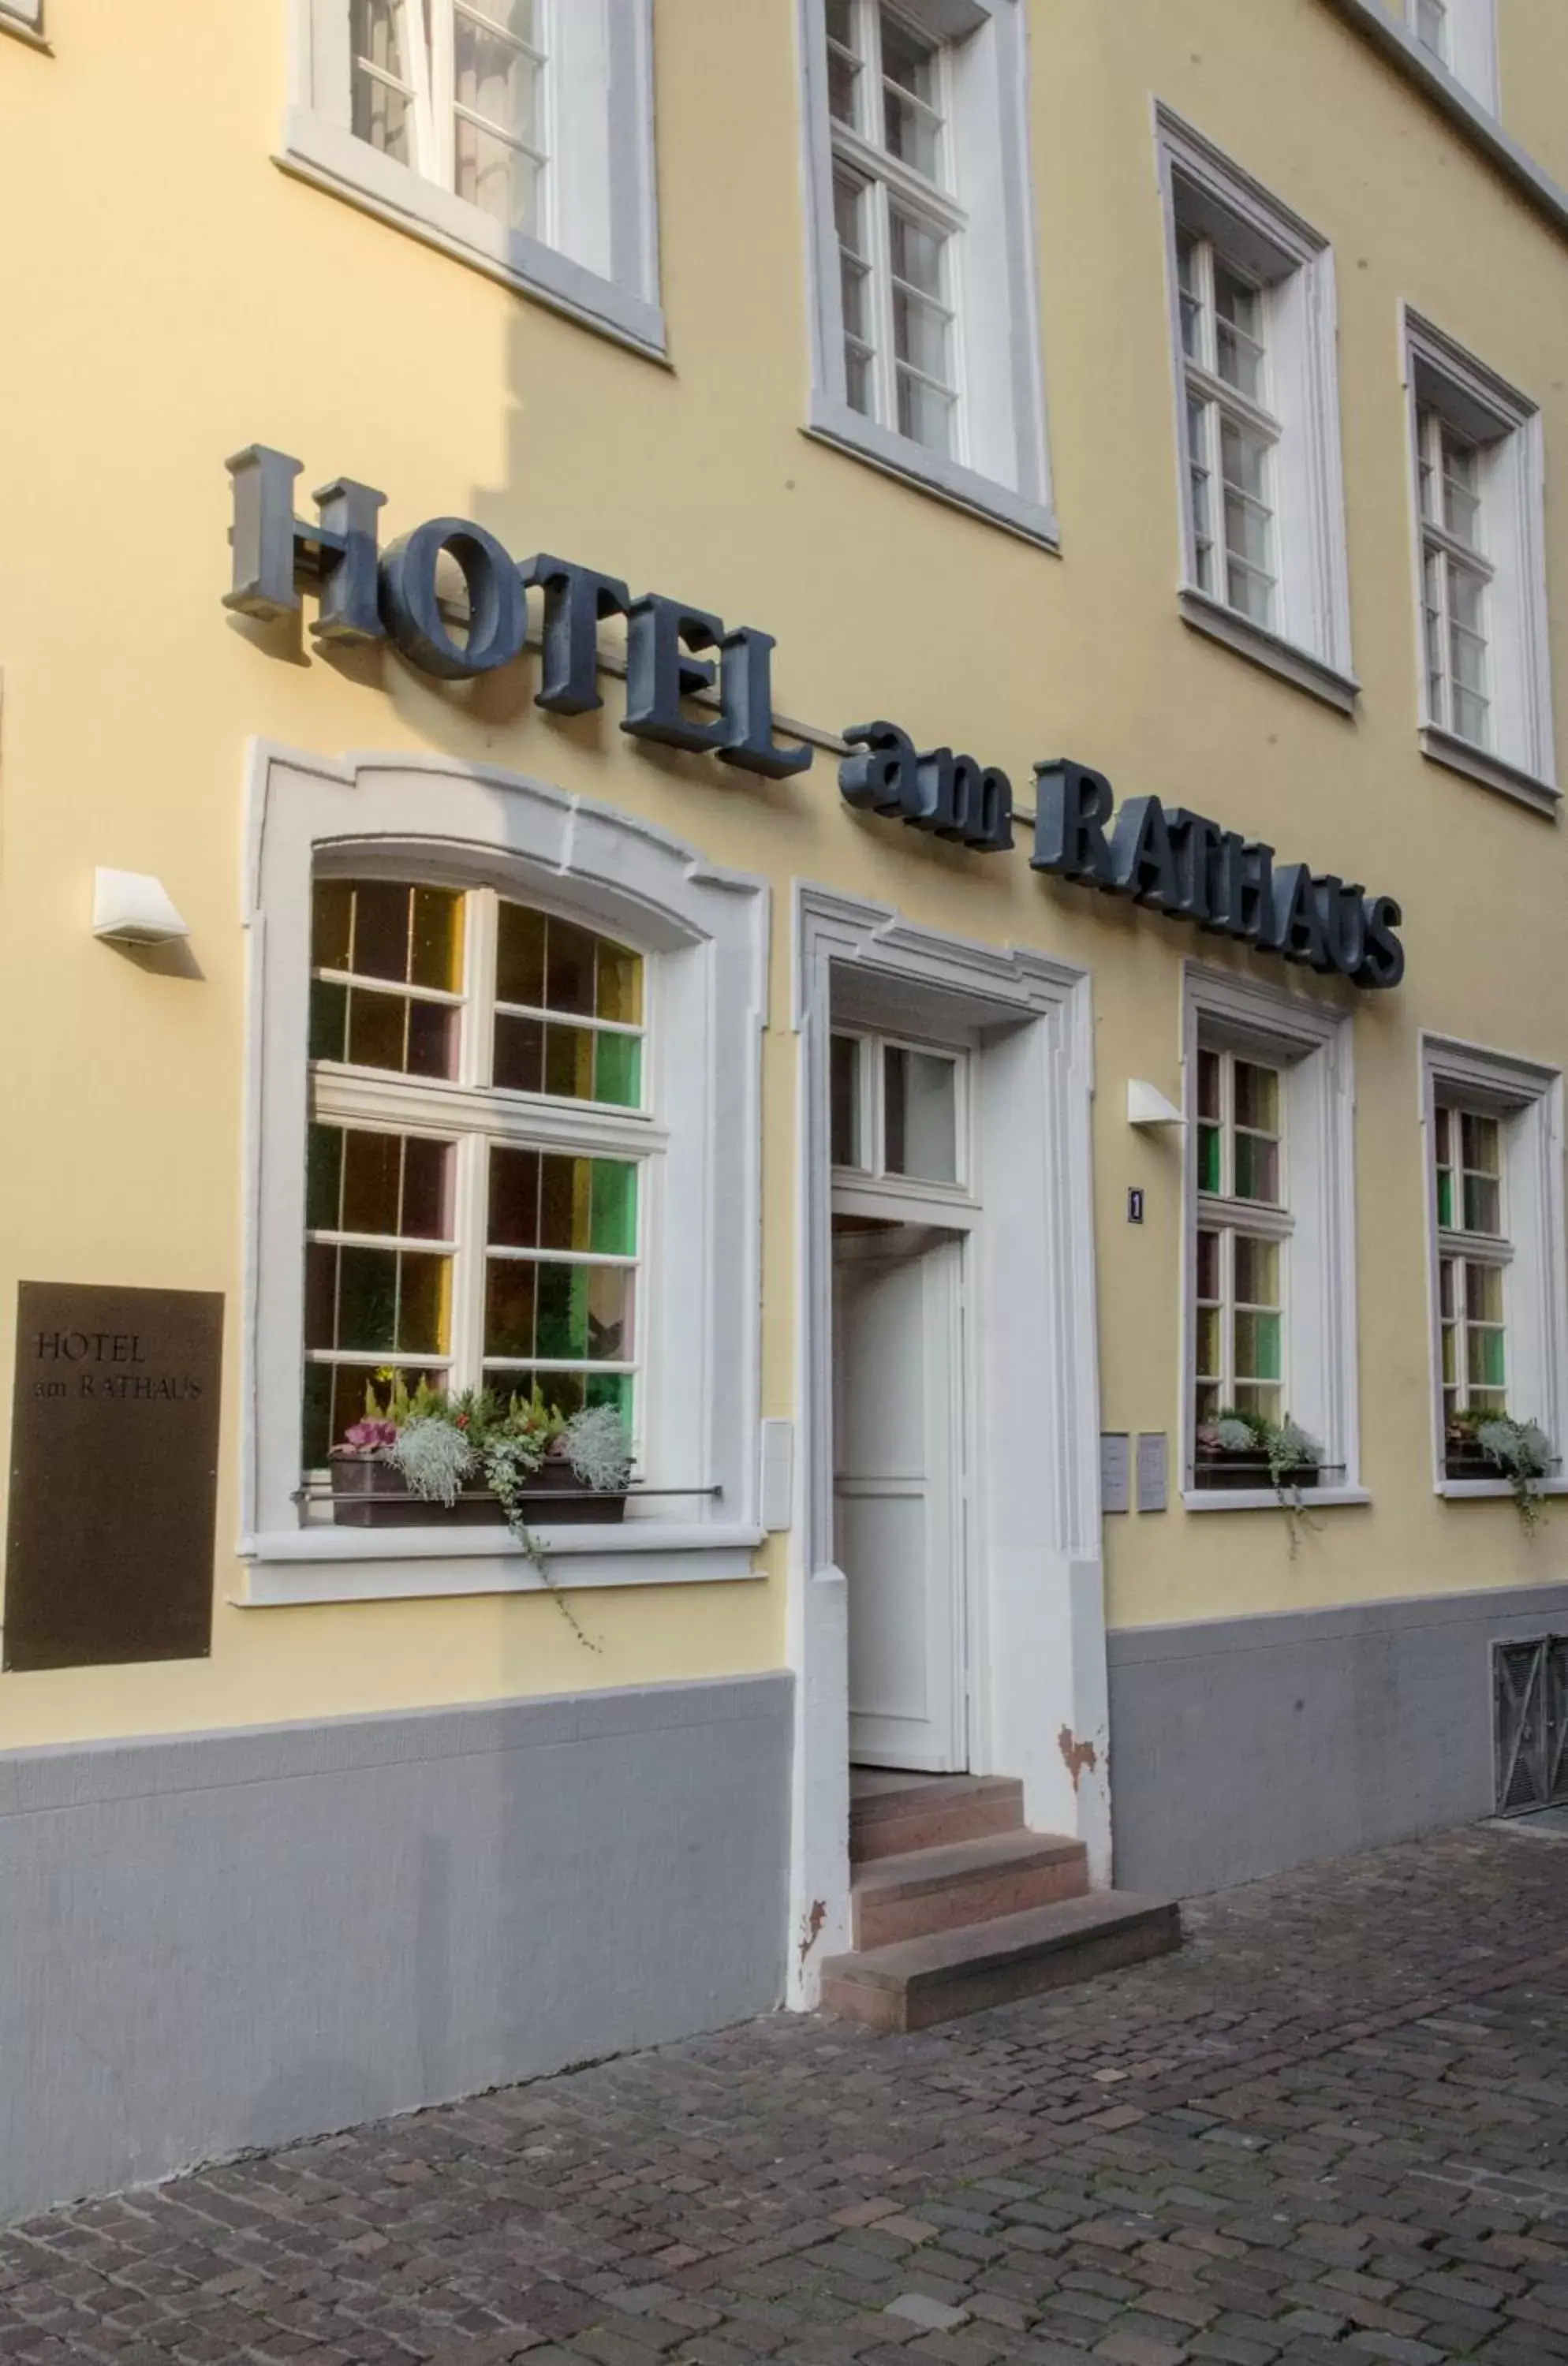 Property Building in Hotel am Rathaus